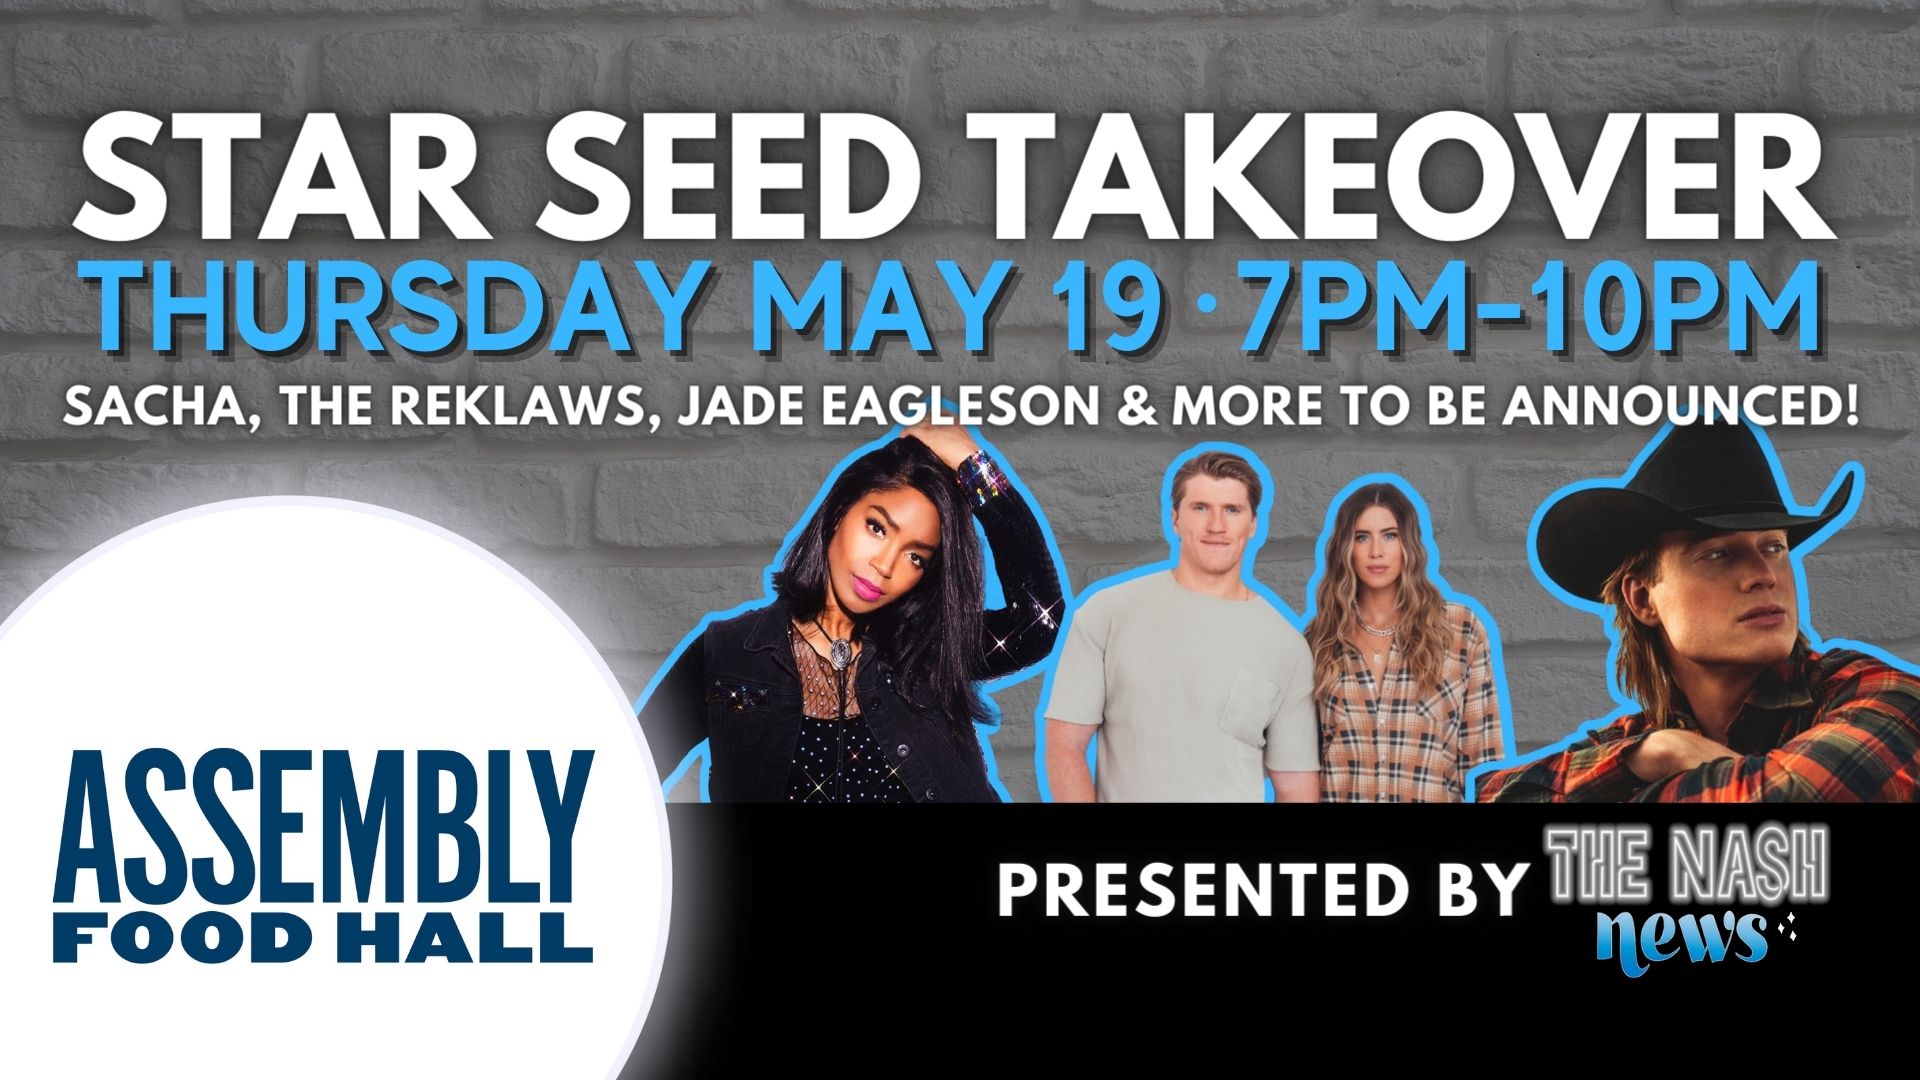 Promo image of The Nash News Presents Star Seed Takeover